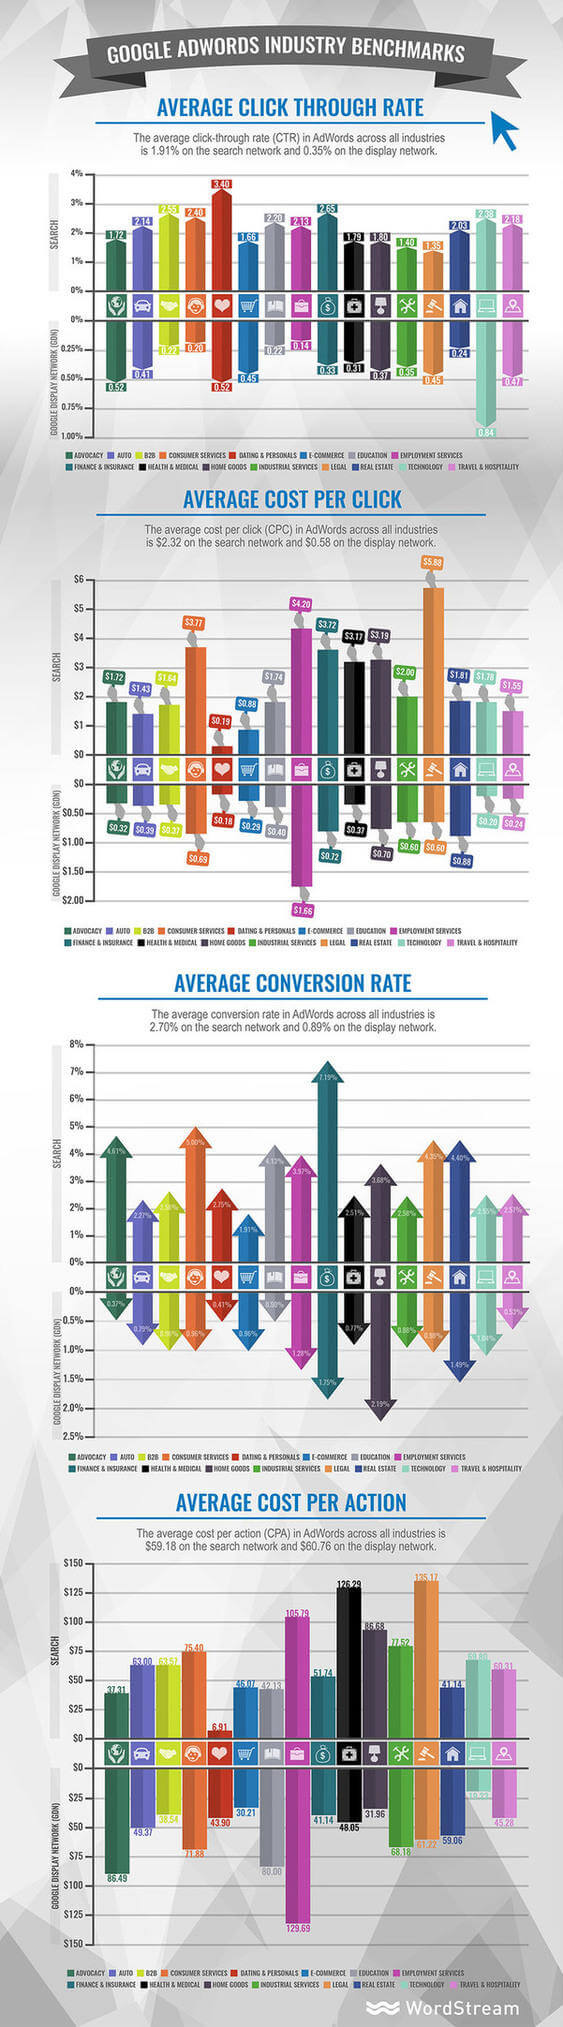 adwords industry benchmarks